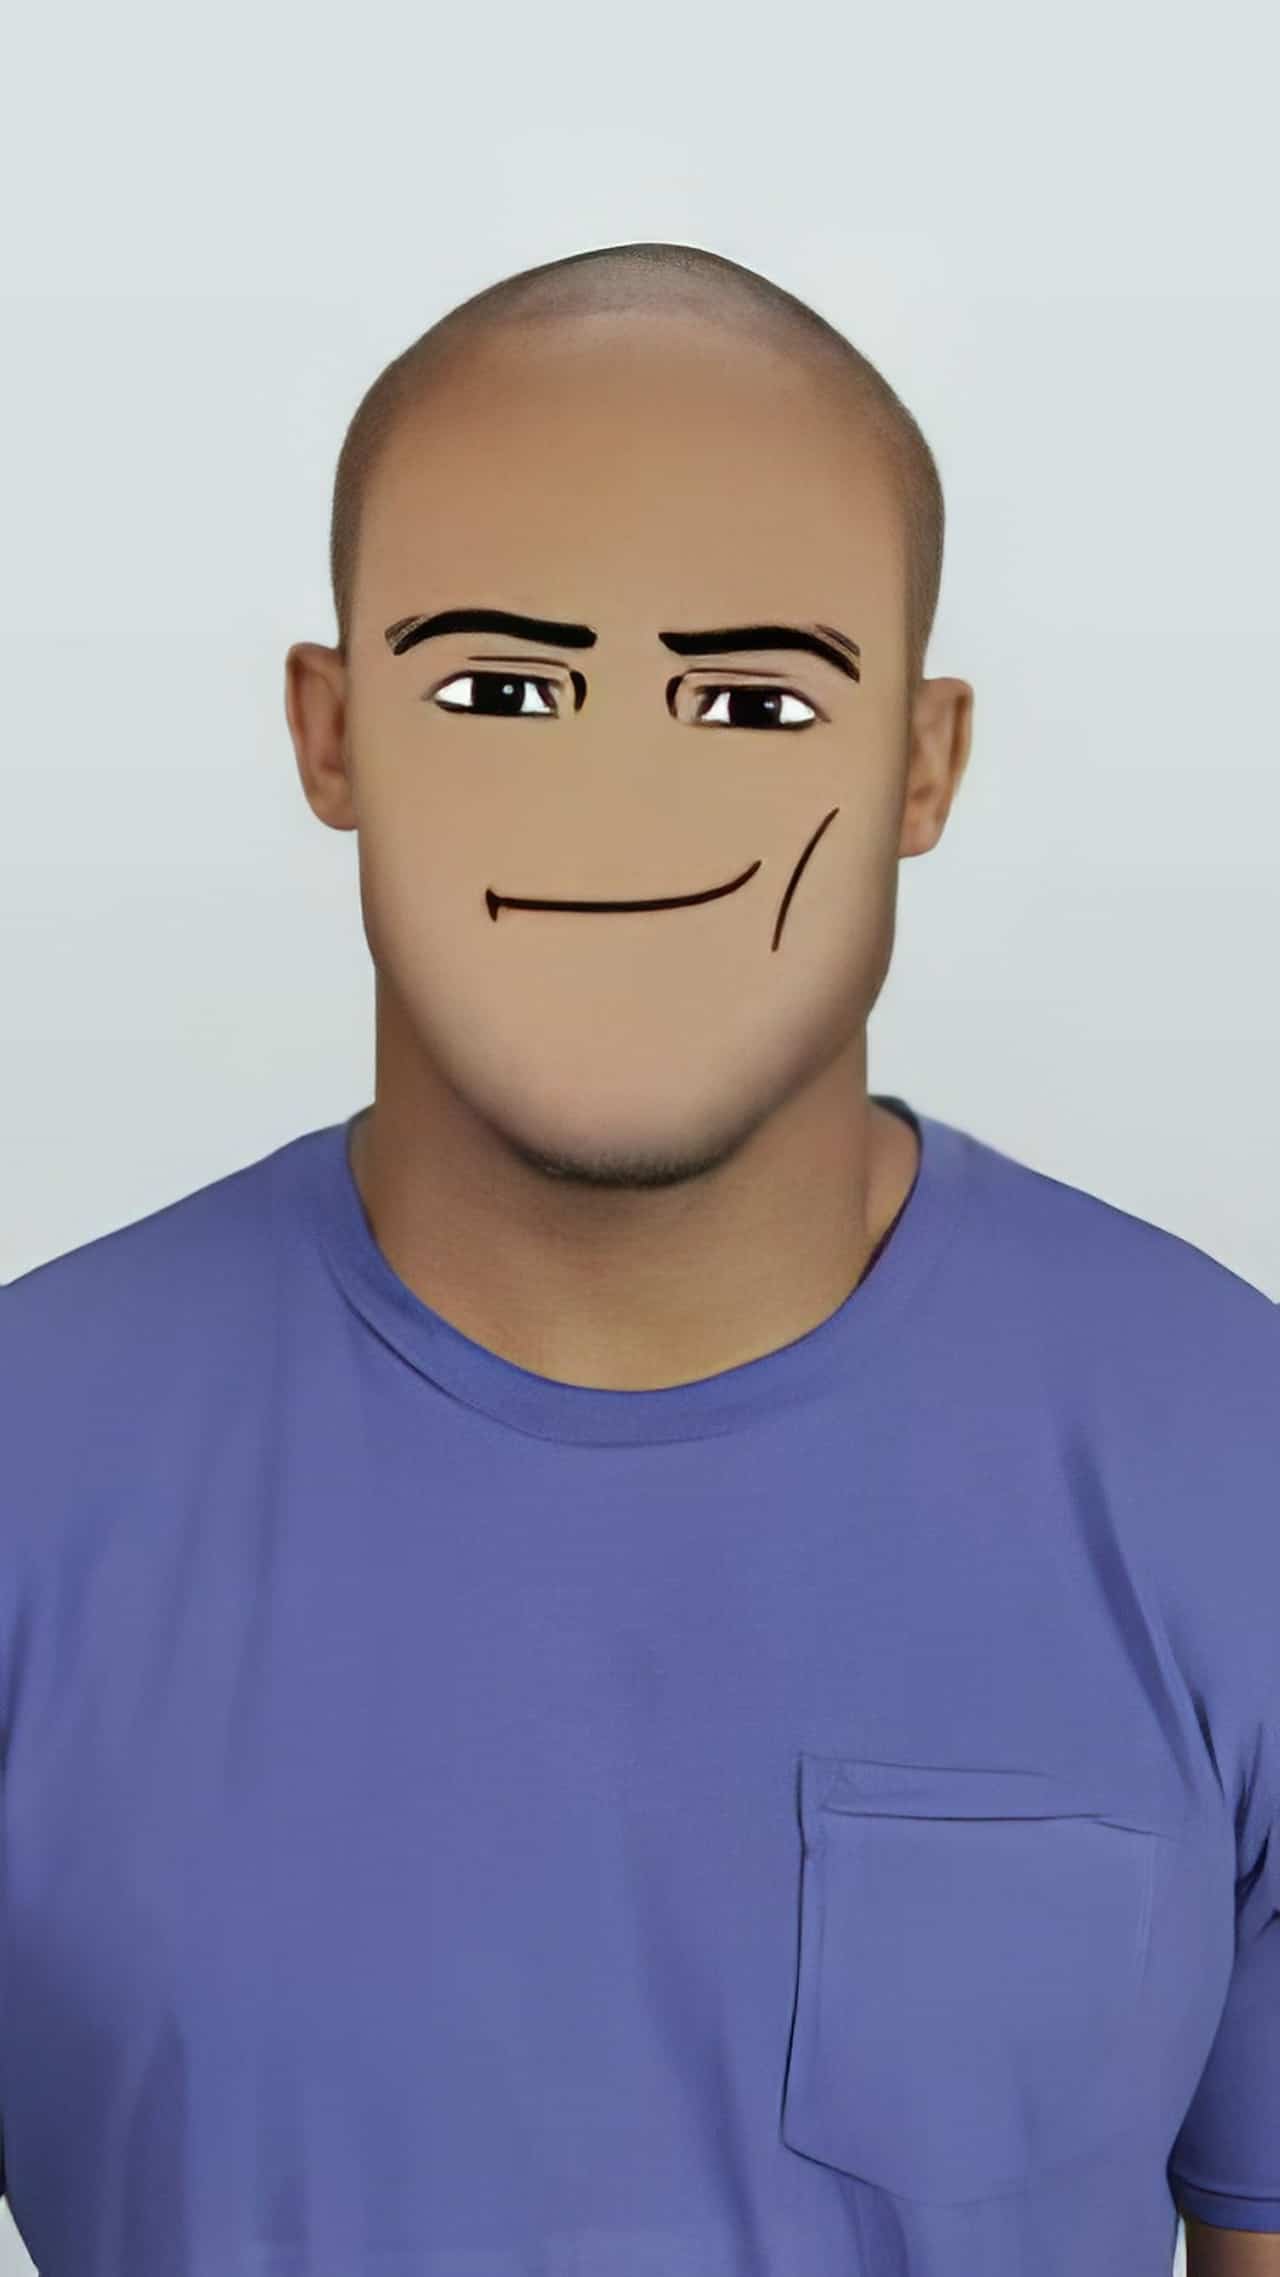 That's not just a Roblox man face, that's THE Roblox man face